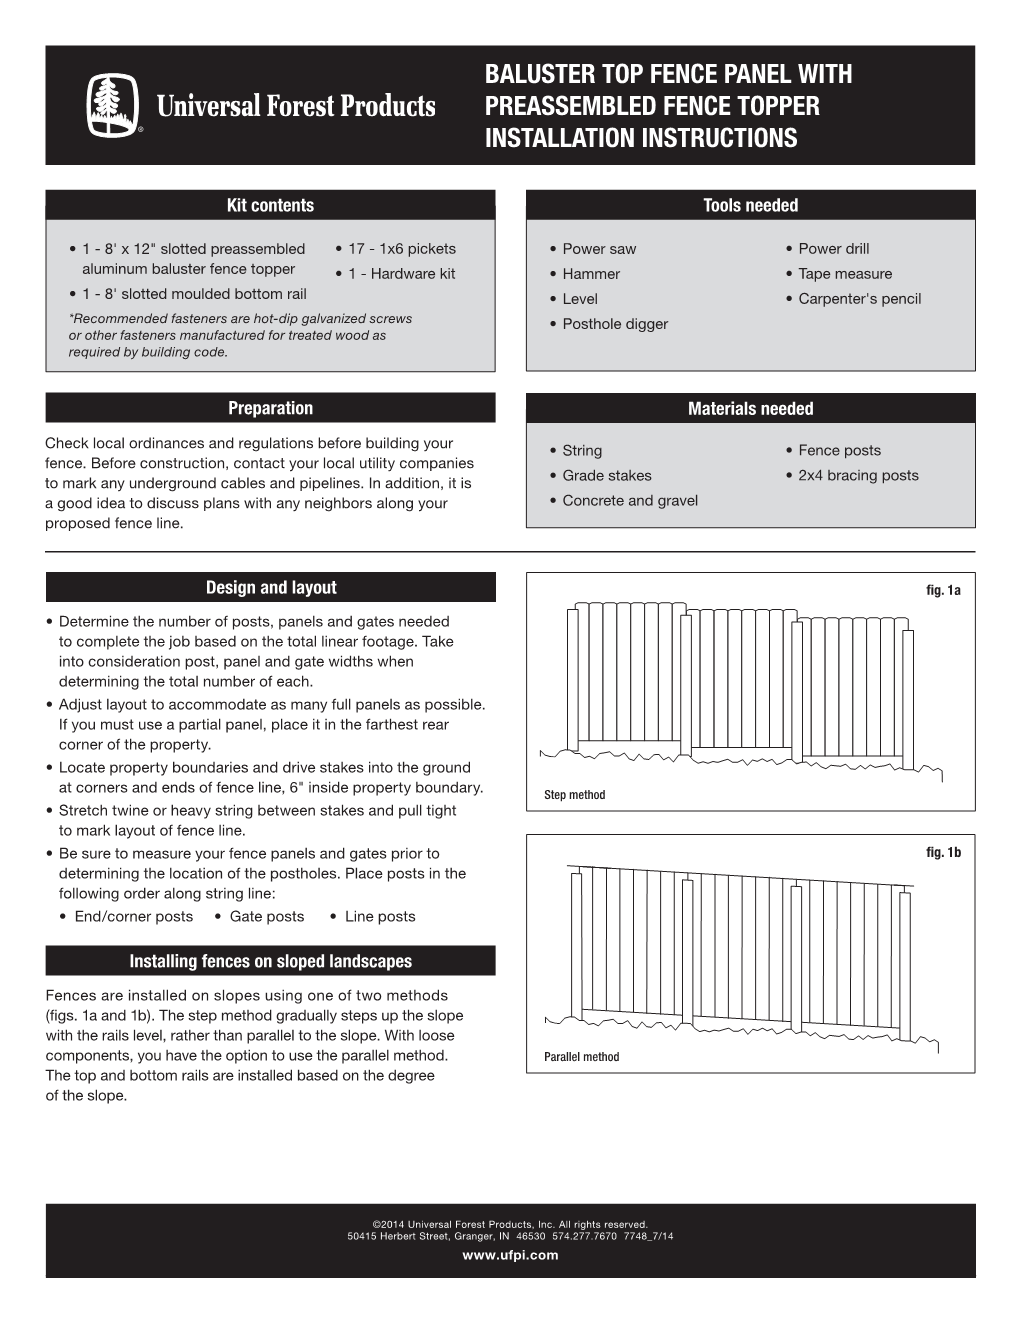 Baluster Top Fence Panel with Preassembled Fence Topper Installation Instructions